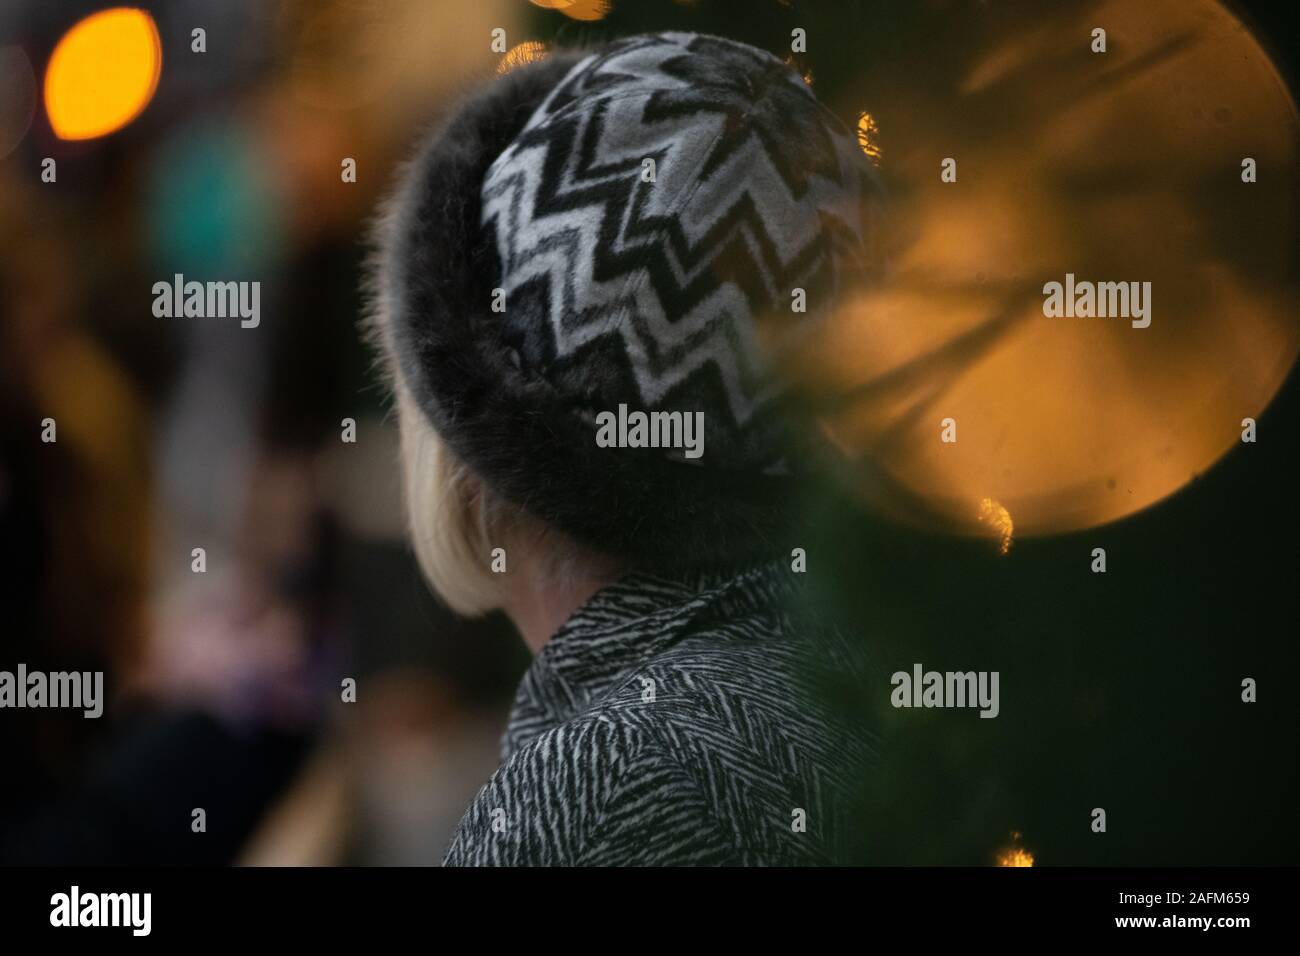 close up of a lady's head looking away, dressed in a winter hat and a coat with Christmas lights the background and foreground. Stock Photo